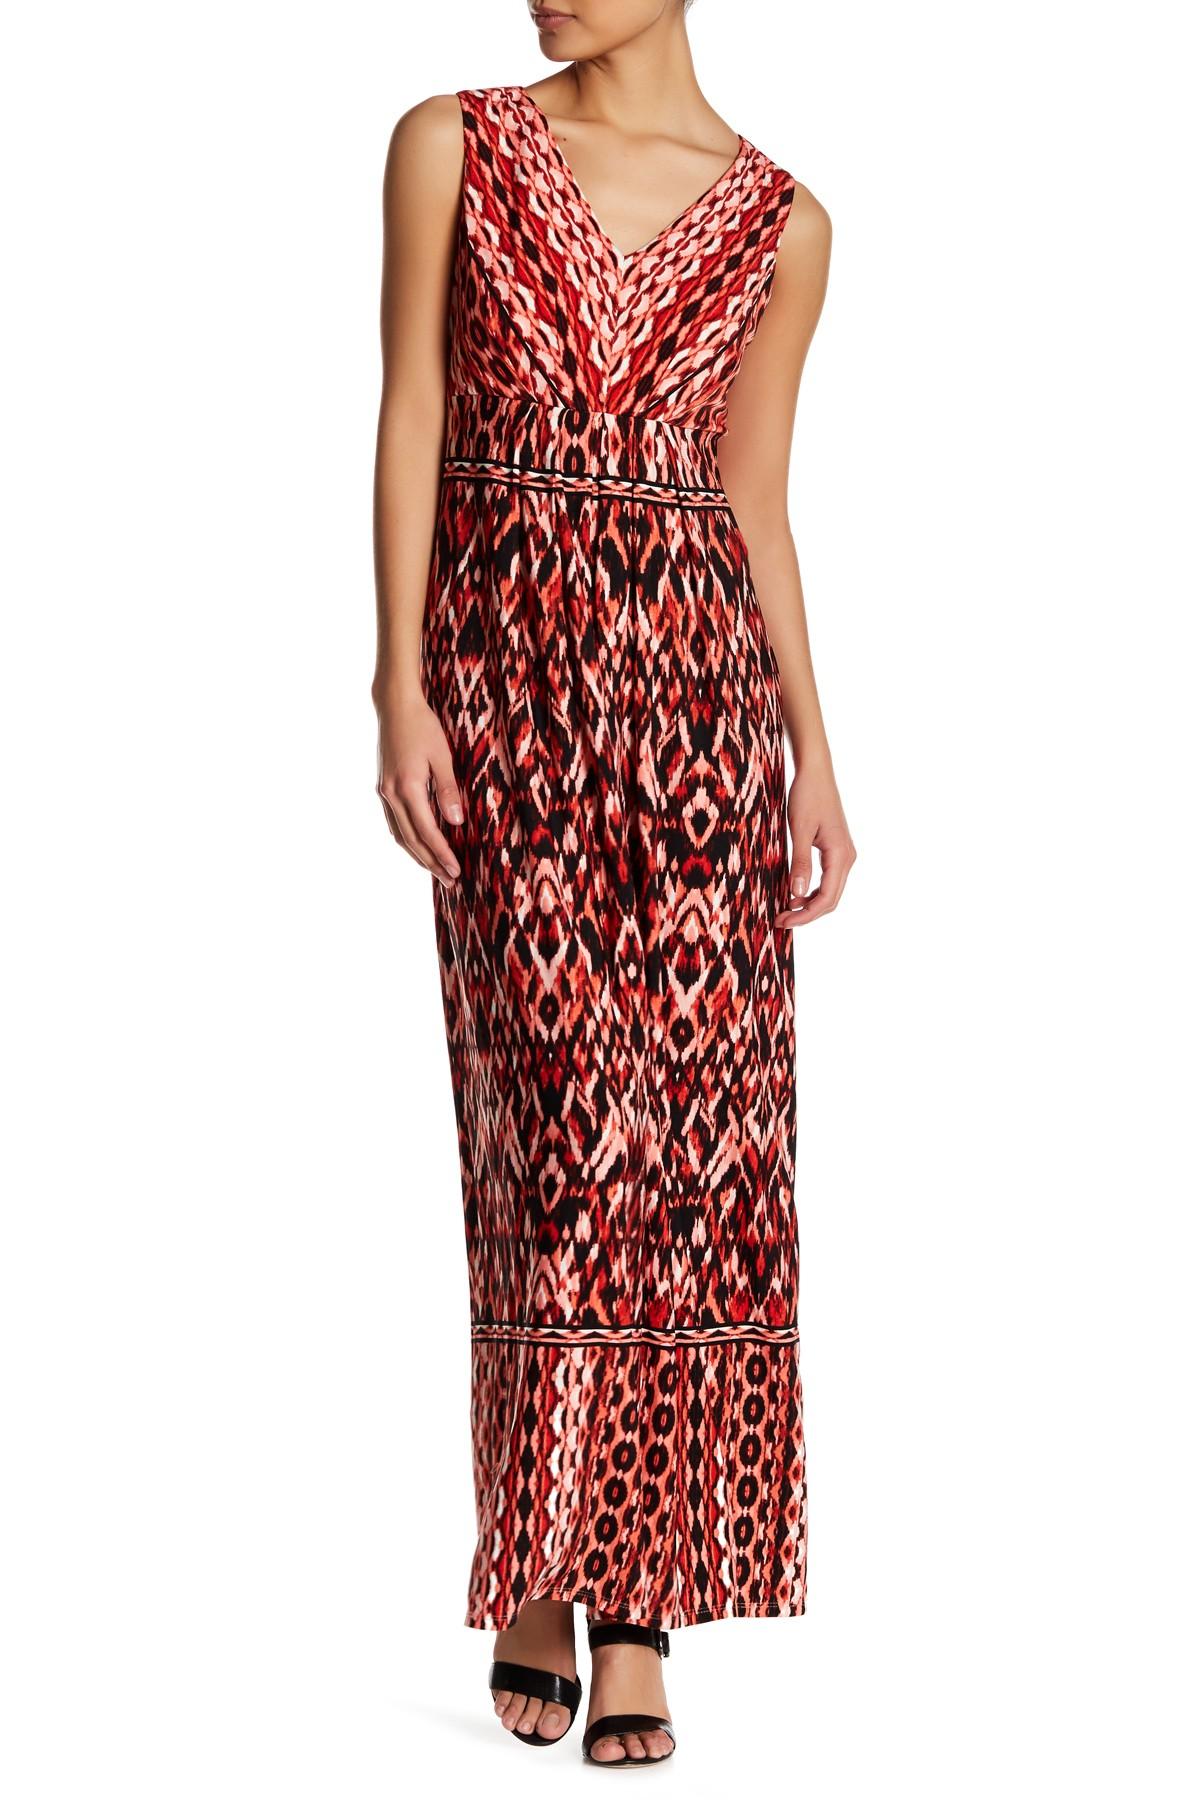 Lyst - Maggy London Ikat Chain Maxi Dress in Red